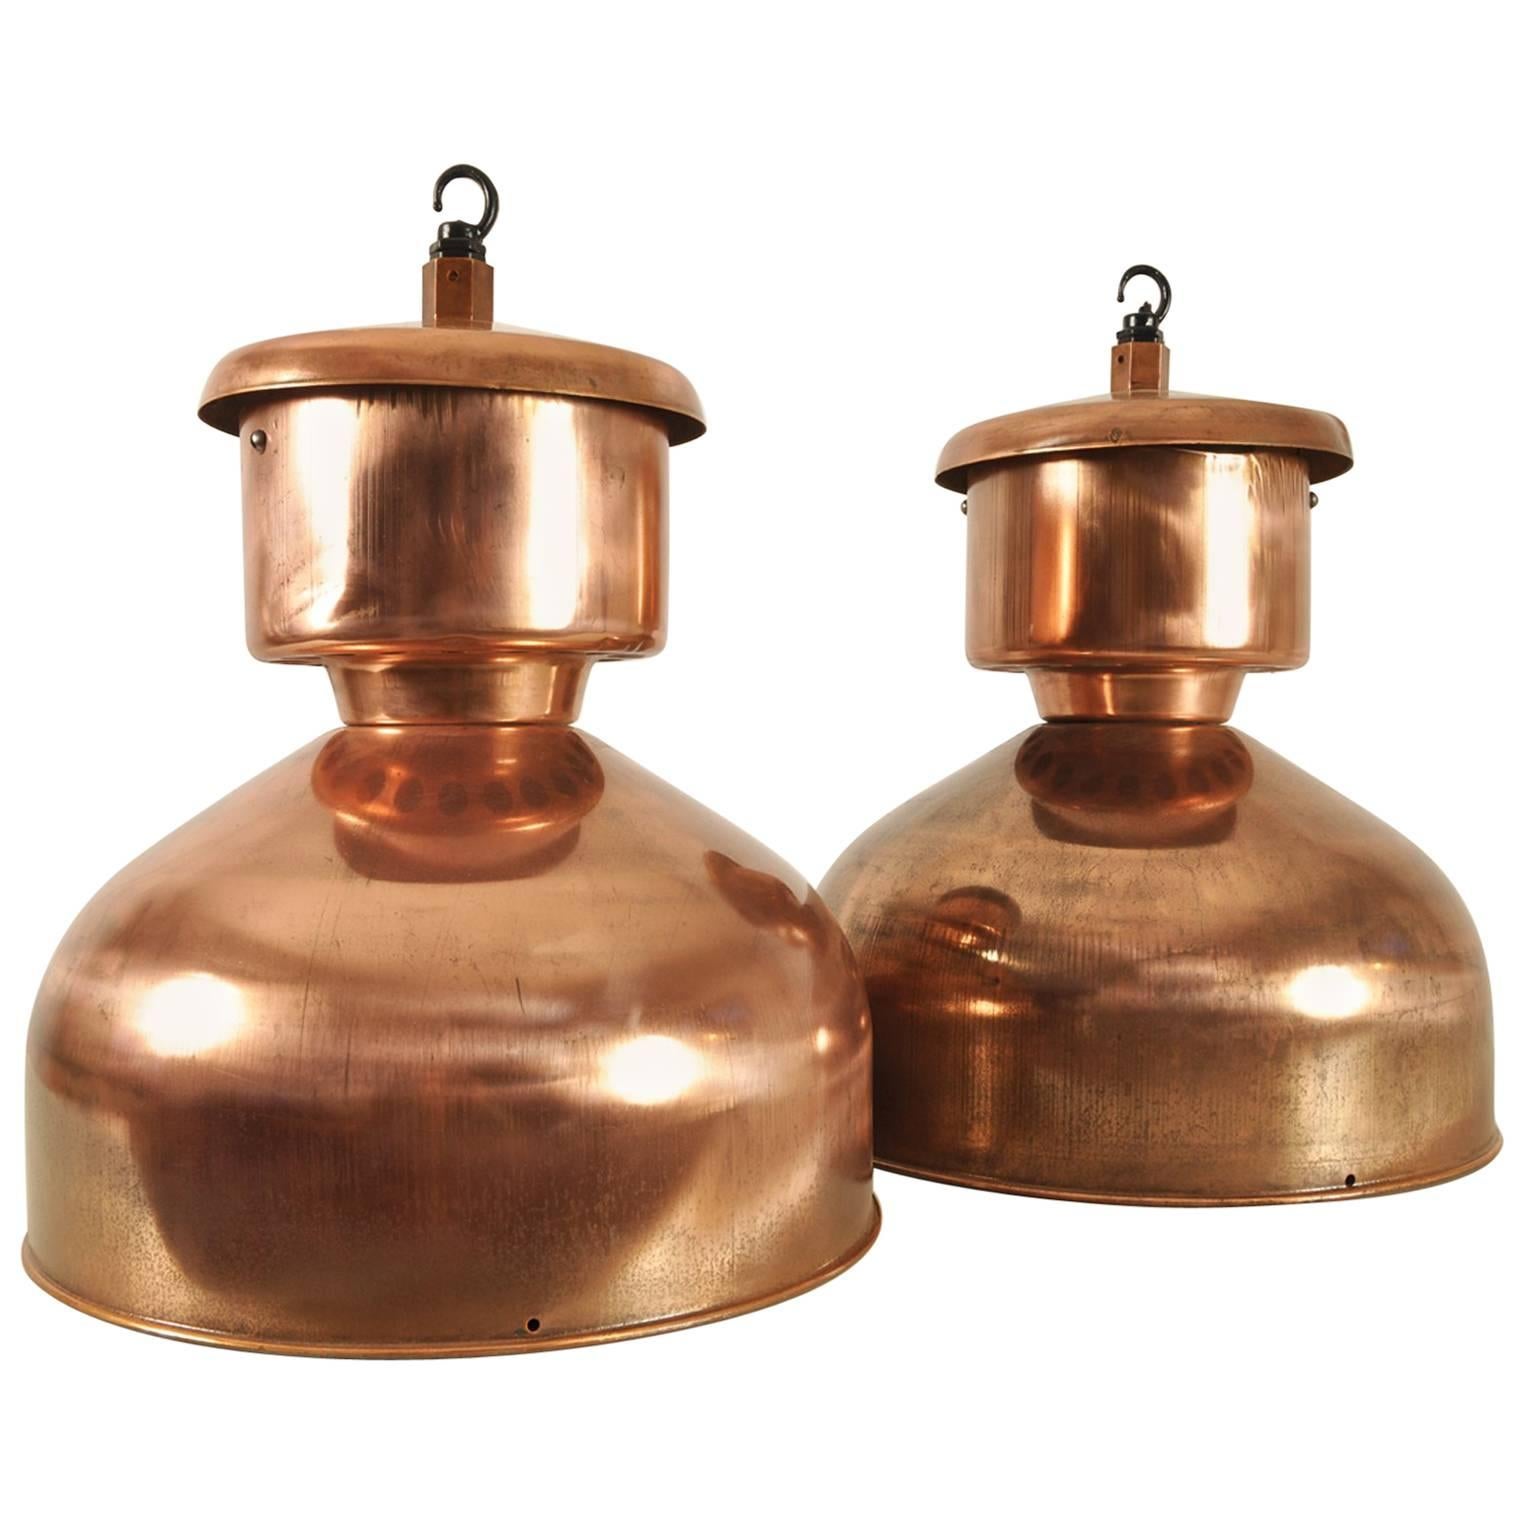 Copper-Plated Industrial Pendant Lights For Sale